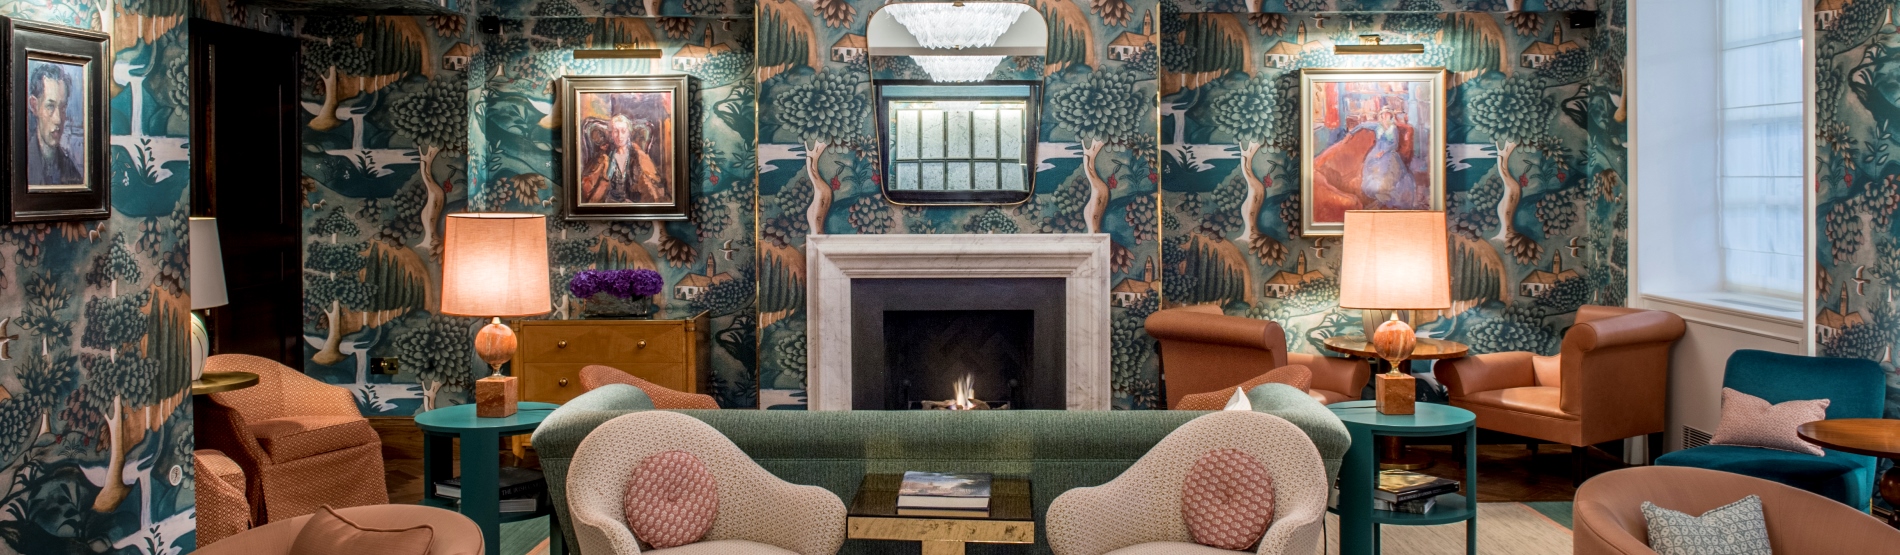 the Sitting Room at The Bloomsbury hotel in London